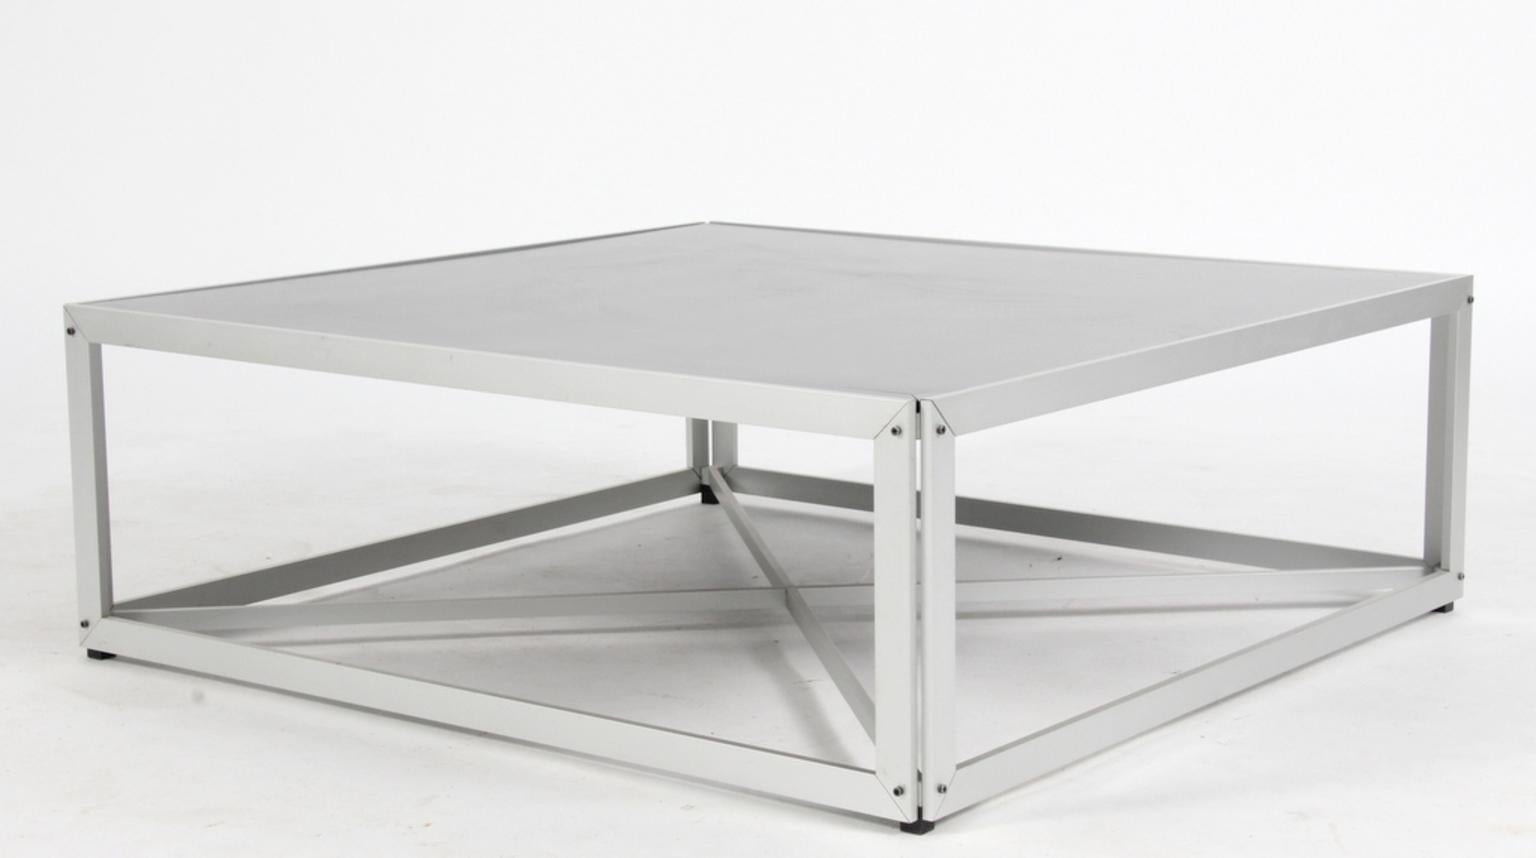 Poul Kjærholm coffee table in aluminium and black painted mdf.

Manufactured by PP møbler.

Exhibition System. 

Designed in 1979.

Later put in production for 